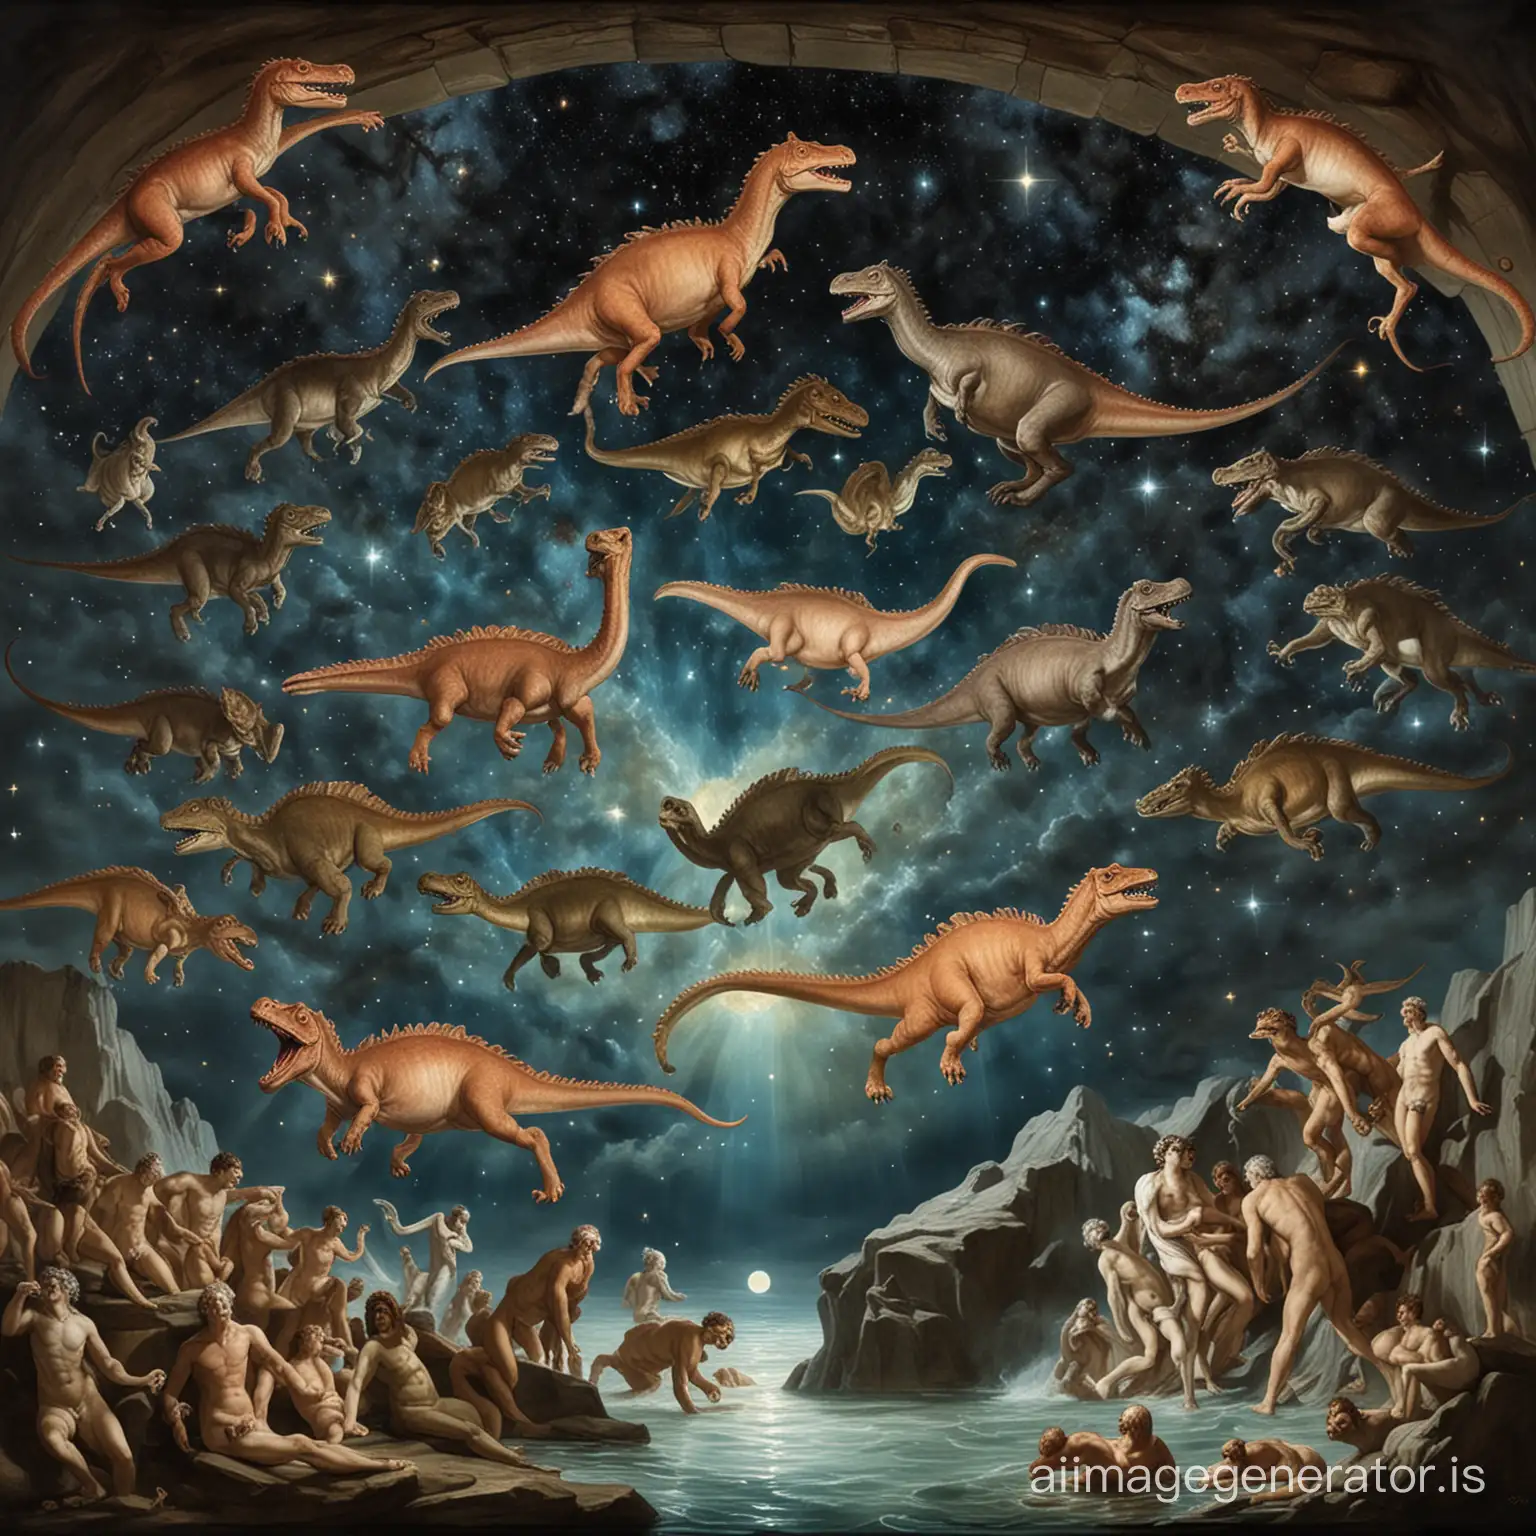 Dinousaurs swim among the stars with William Blake figures in Michelangelo anatomy composed in a Rembrandt painting.